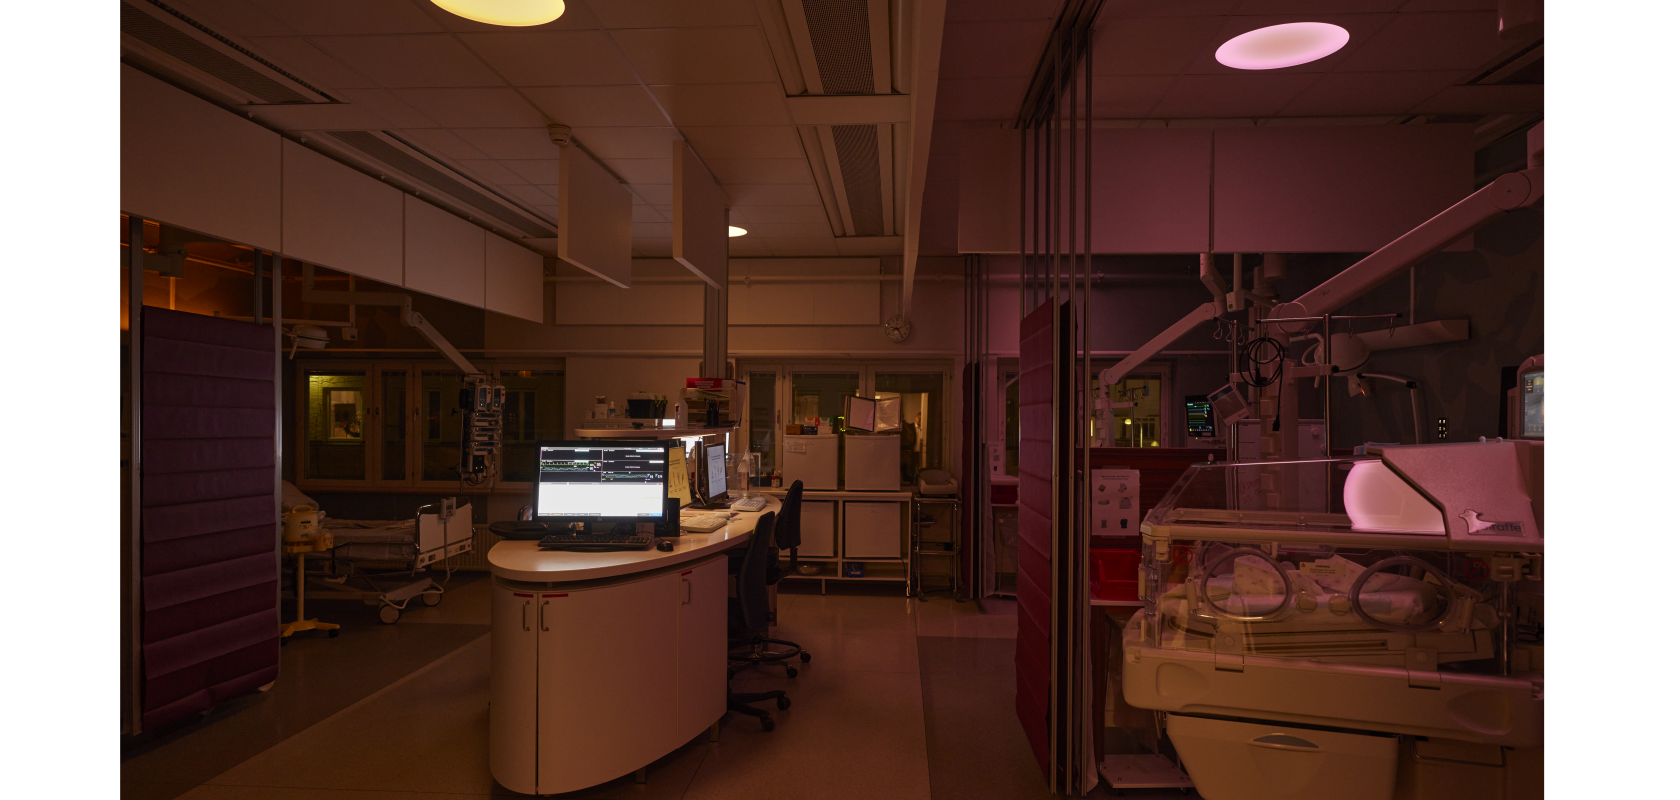 Circadian lighting is increasingly being deployed within the healthcare sector, for example in this Neonatal Intensive Care Ward at Uppsala University Hospital, Sweden